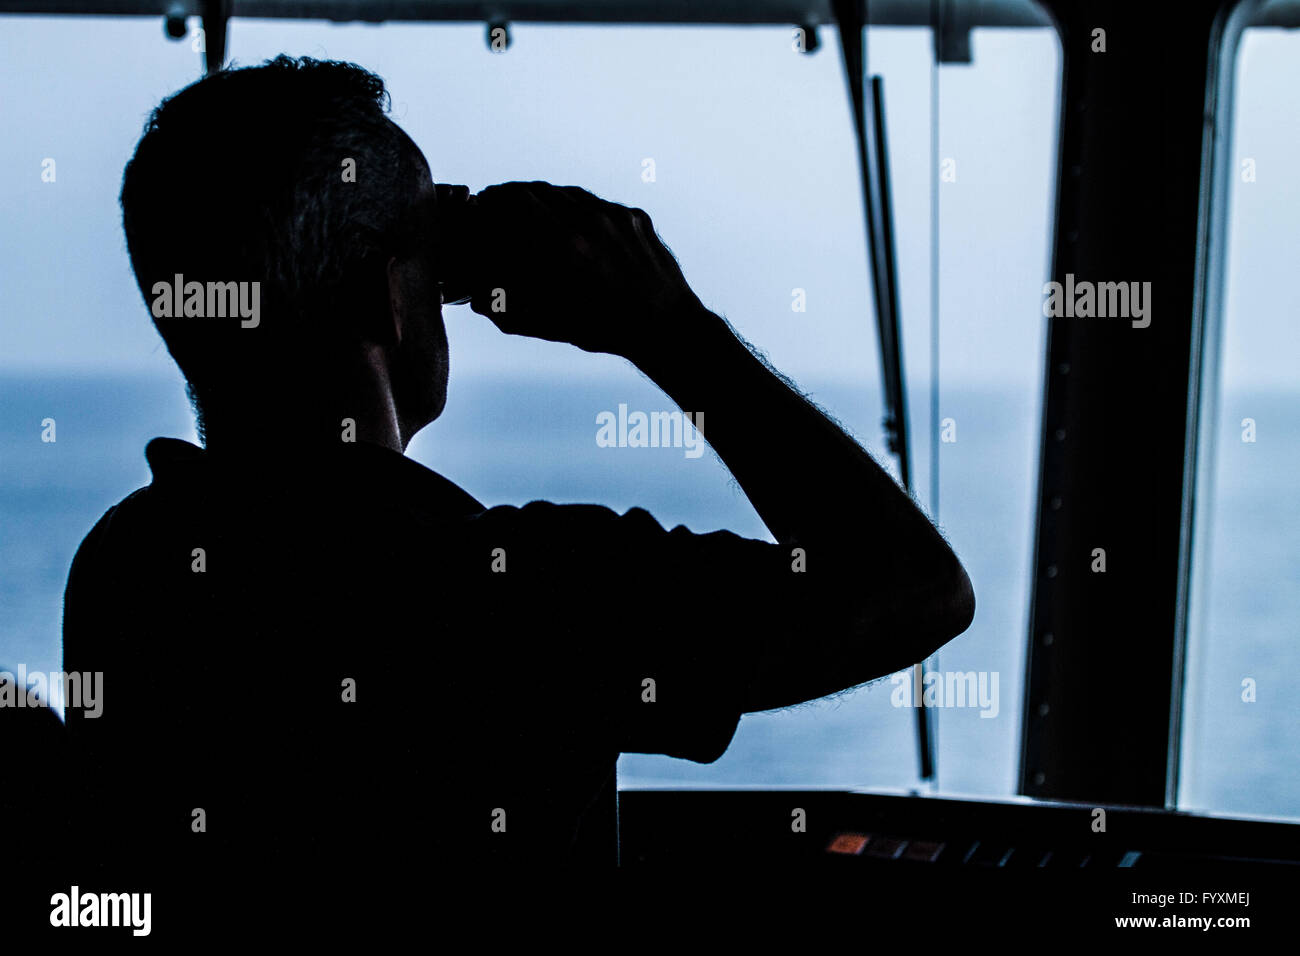 Silhouette of man with binoculars on a container ship at sea Stock Photo